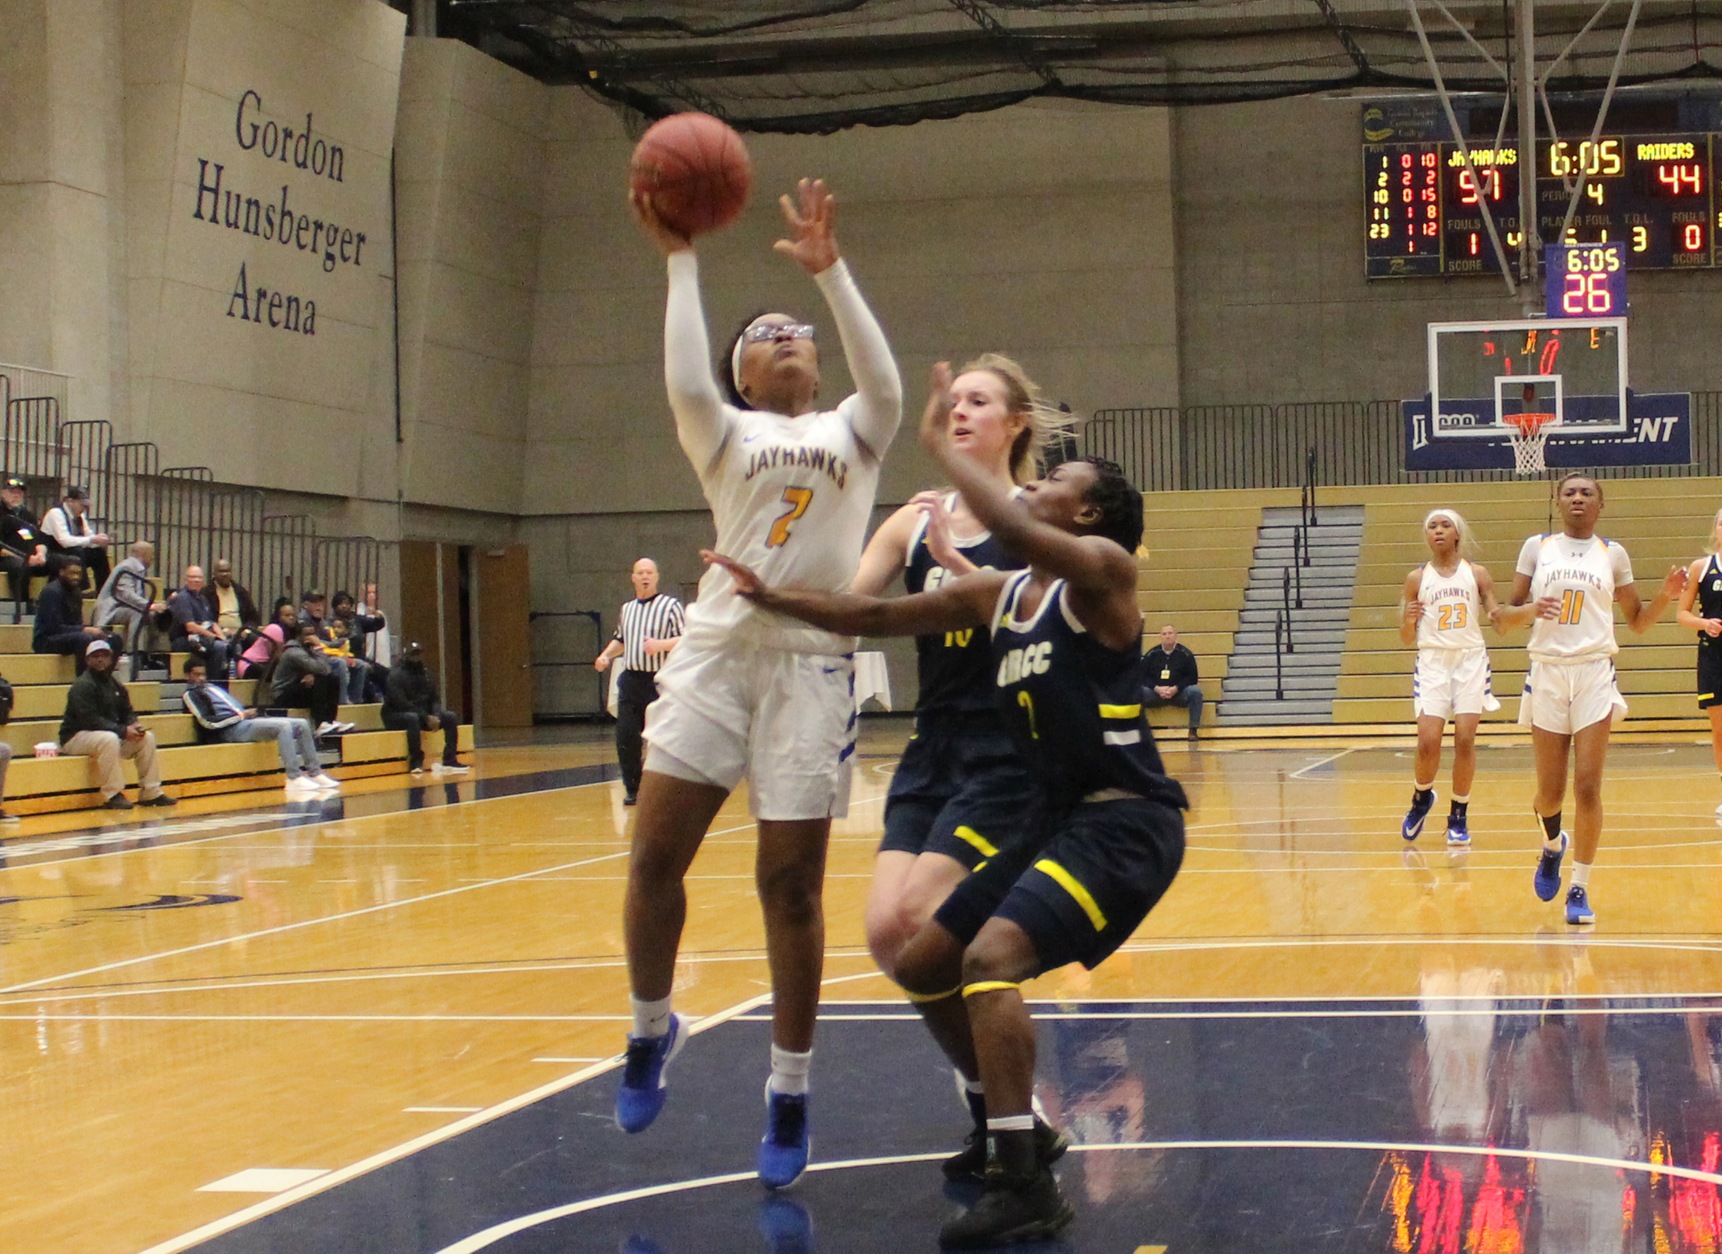 Tanae Hammer goes in for the layup